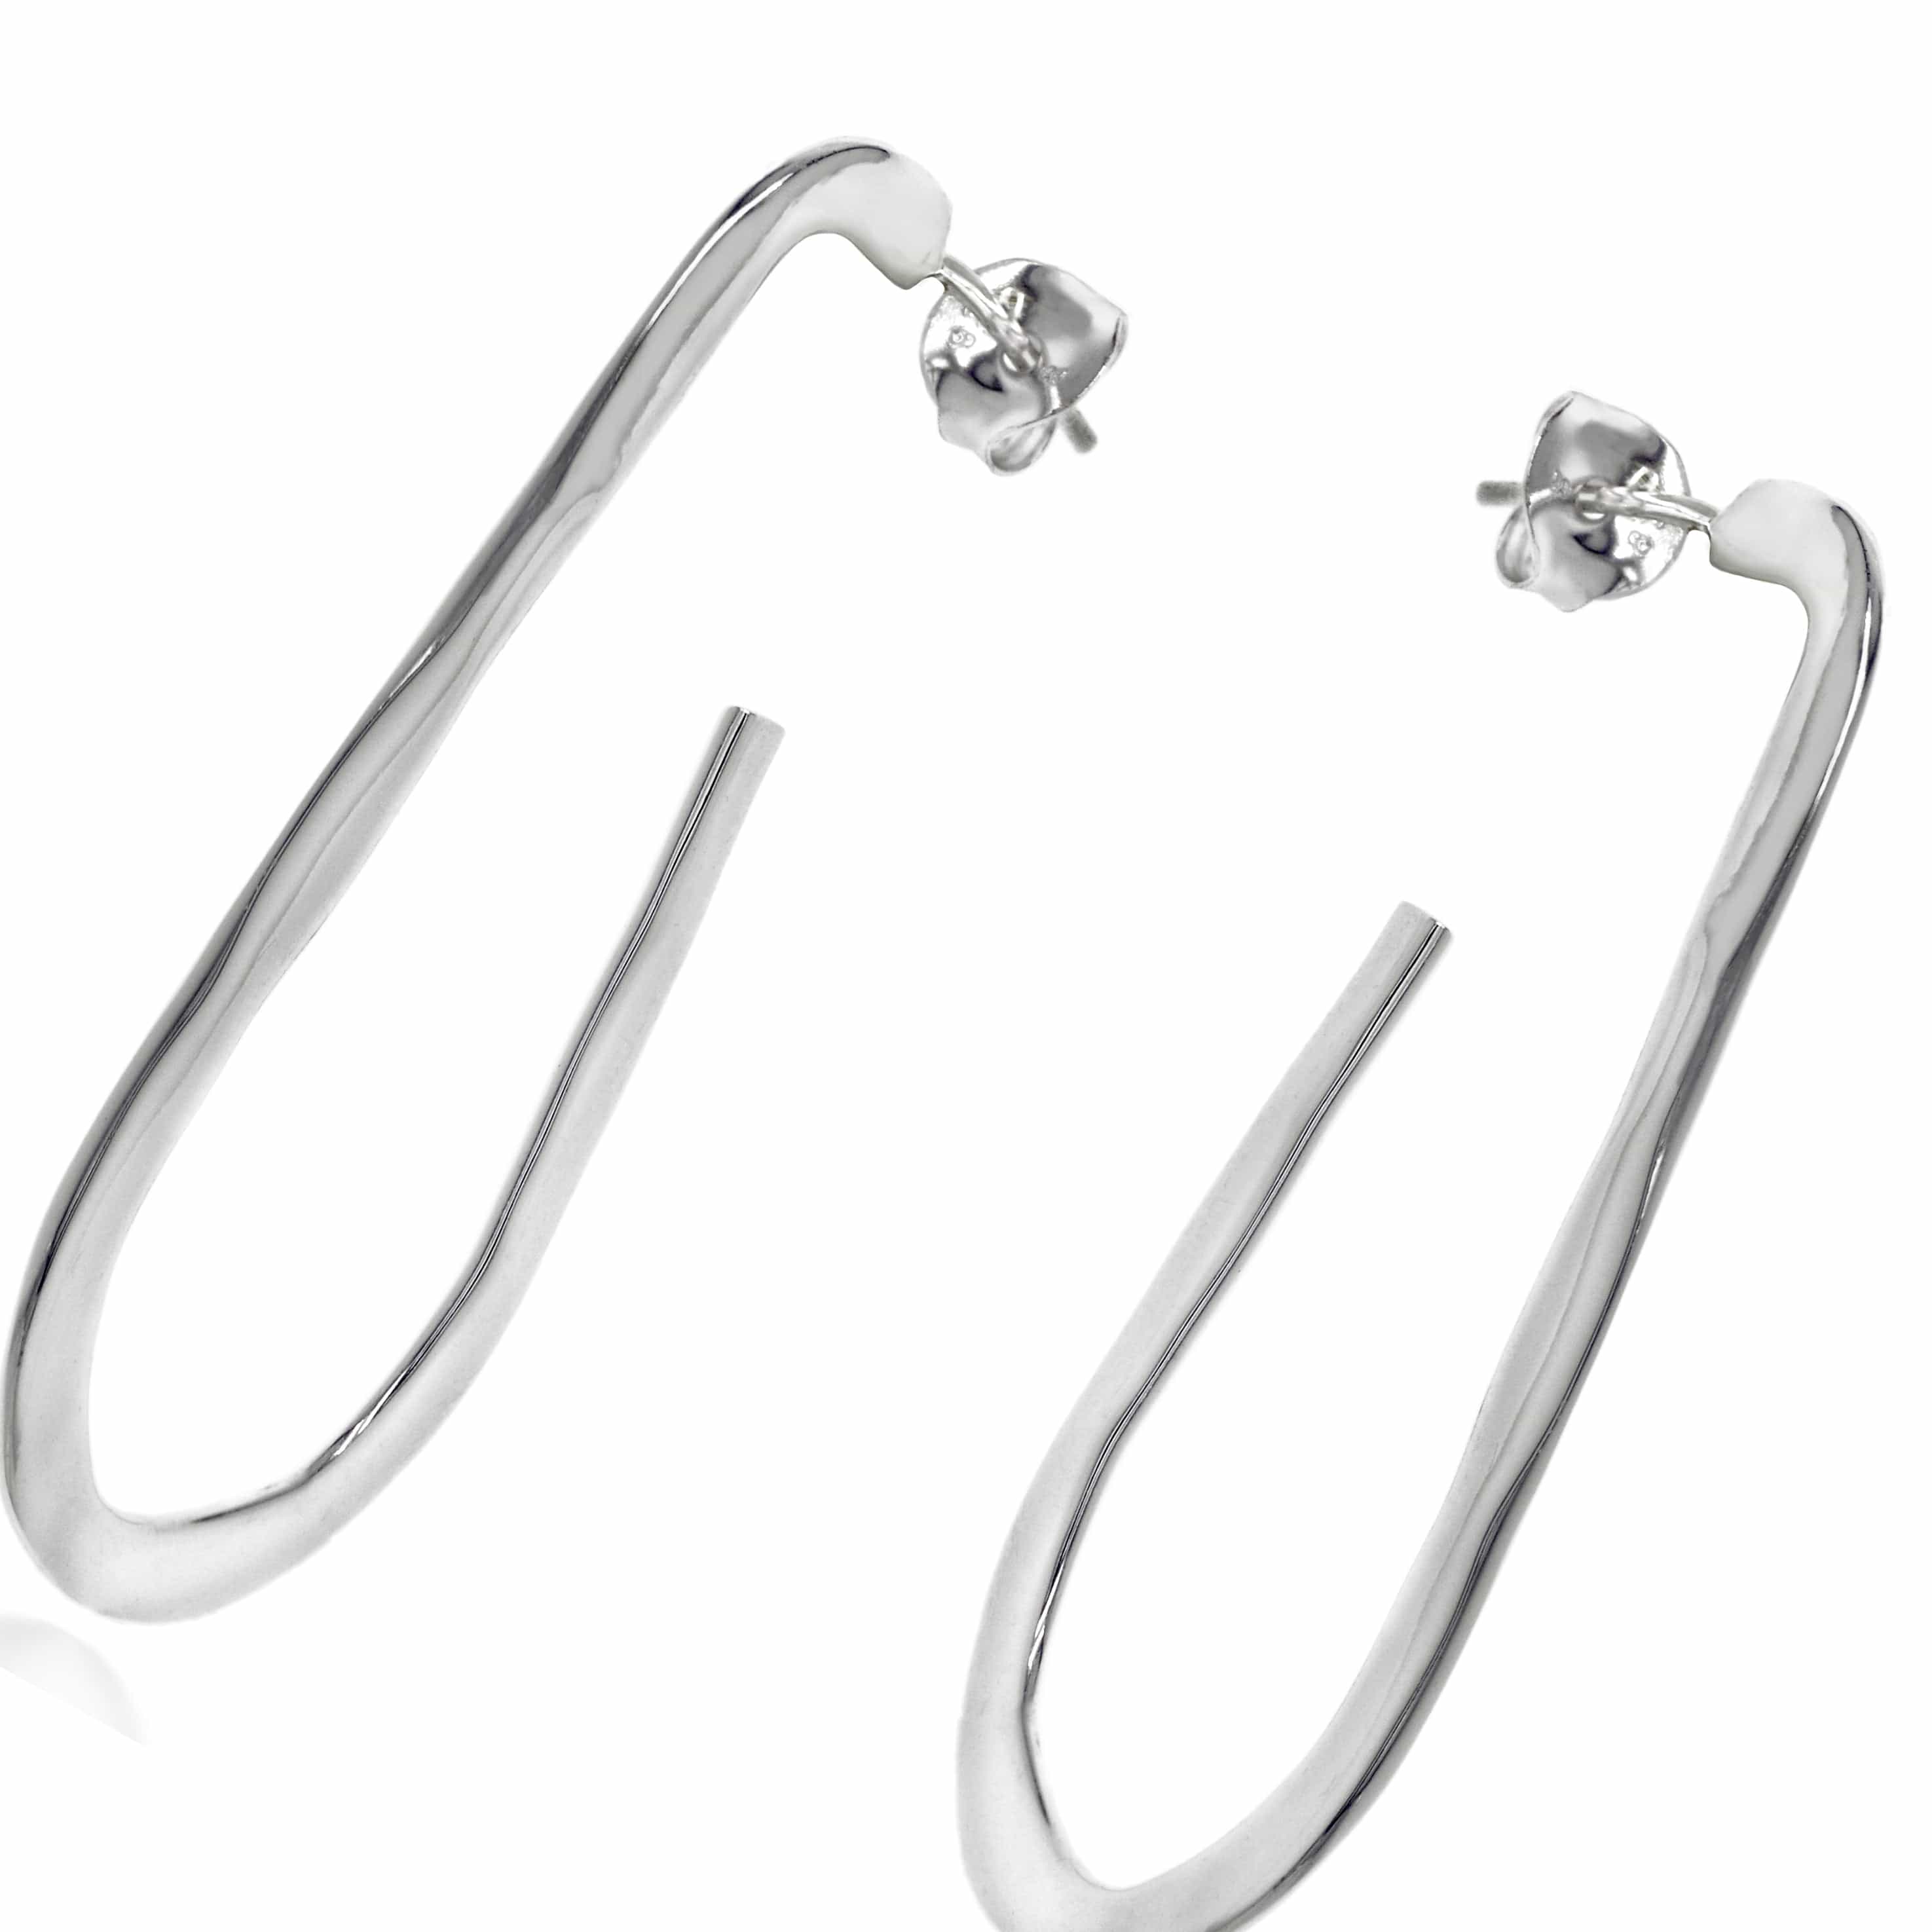 Lynora Silver Earring Sterling Silver / Clear Lynora Sterling Silver Elongated Hoop Earrings